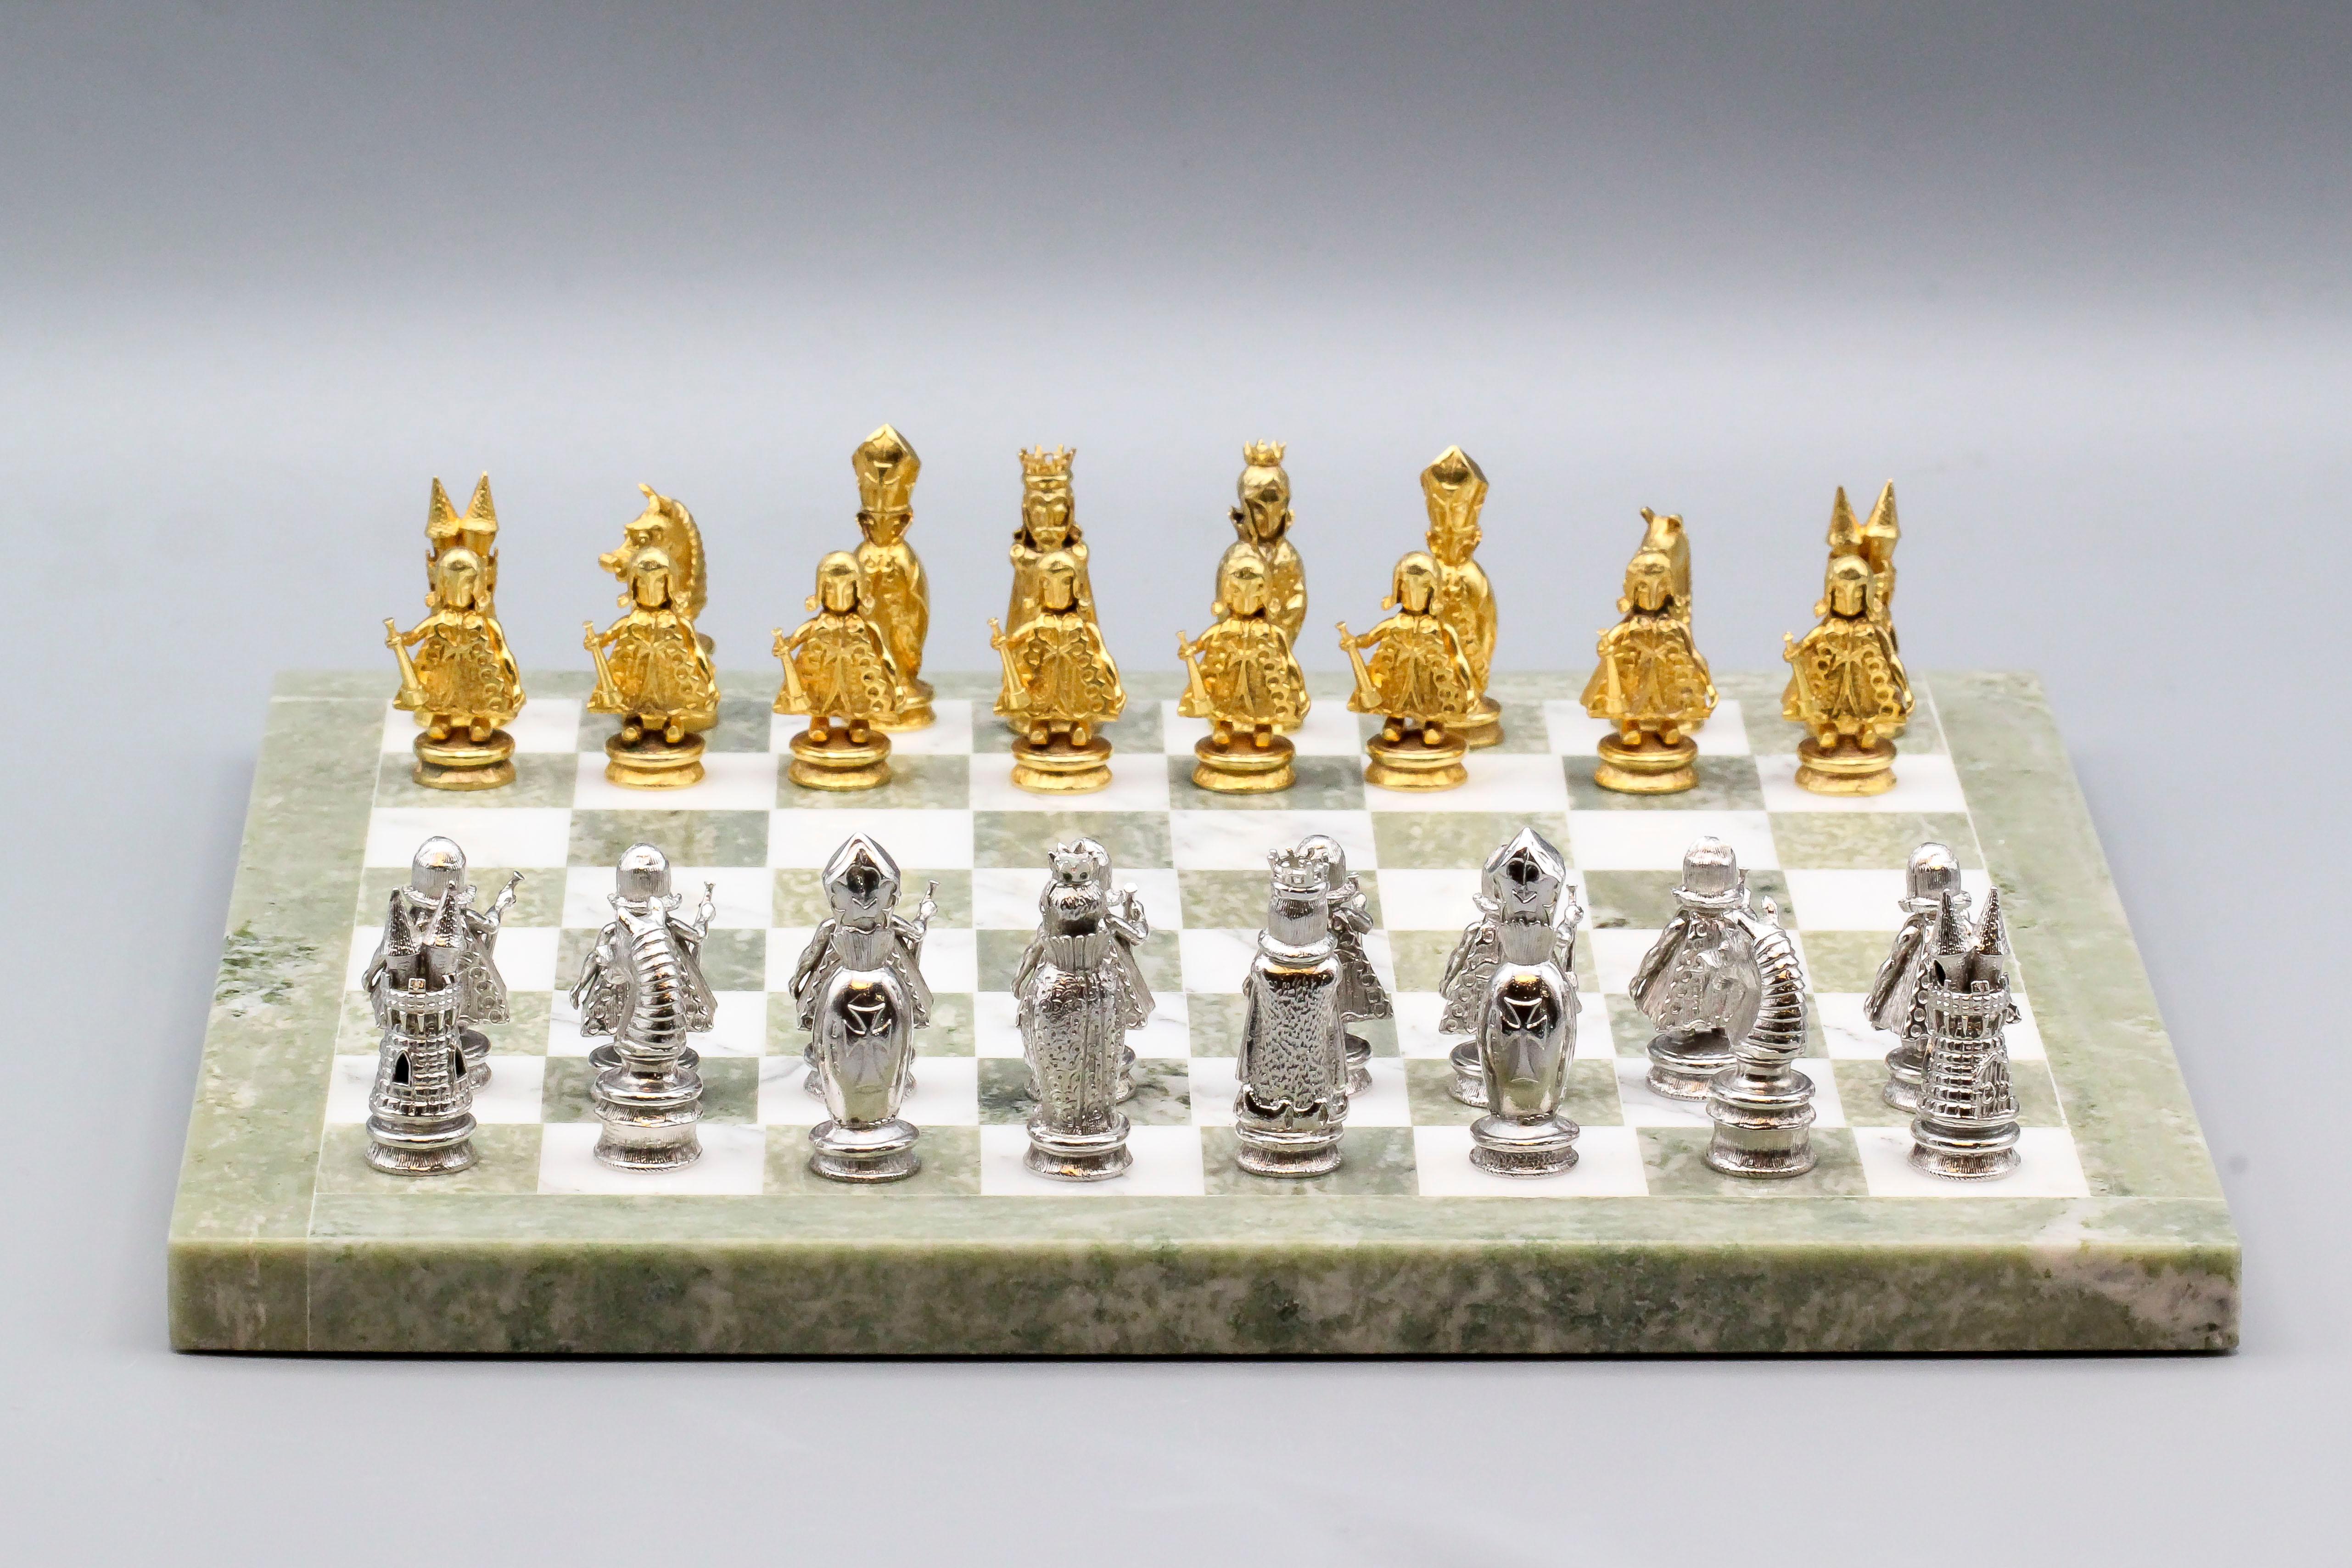 Very fine and rare chess set by Asprey, circa 1960s.  The set features 32 9k yellow and white gold pieces with a marble board.  Comes with its own carrying case. 

Hallmarks: A.C.Co. 9 375, British assay marks